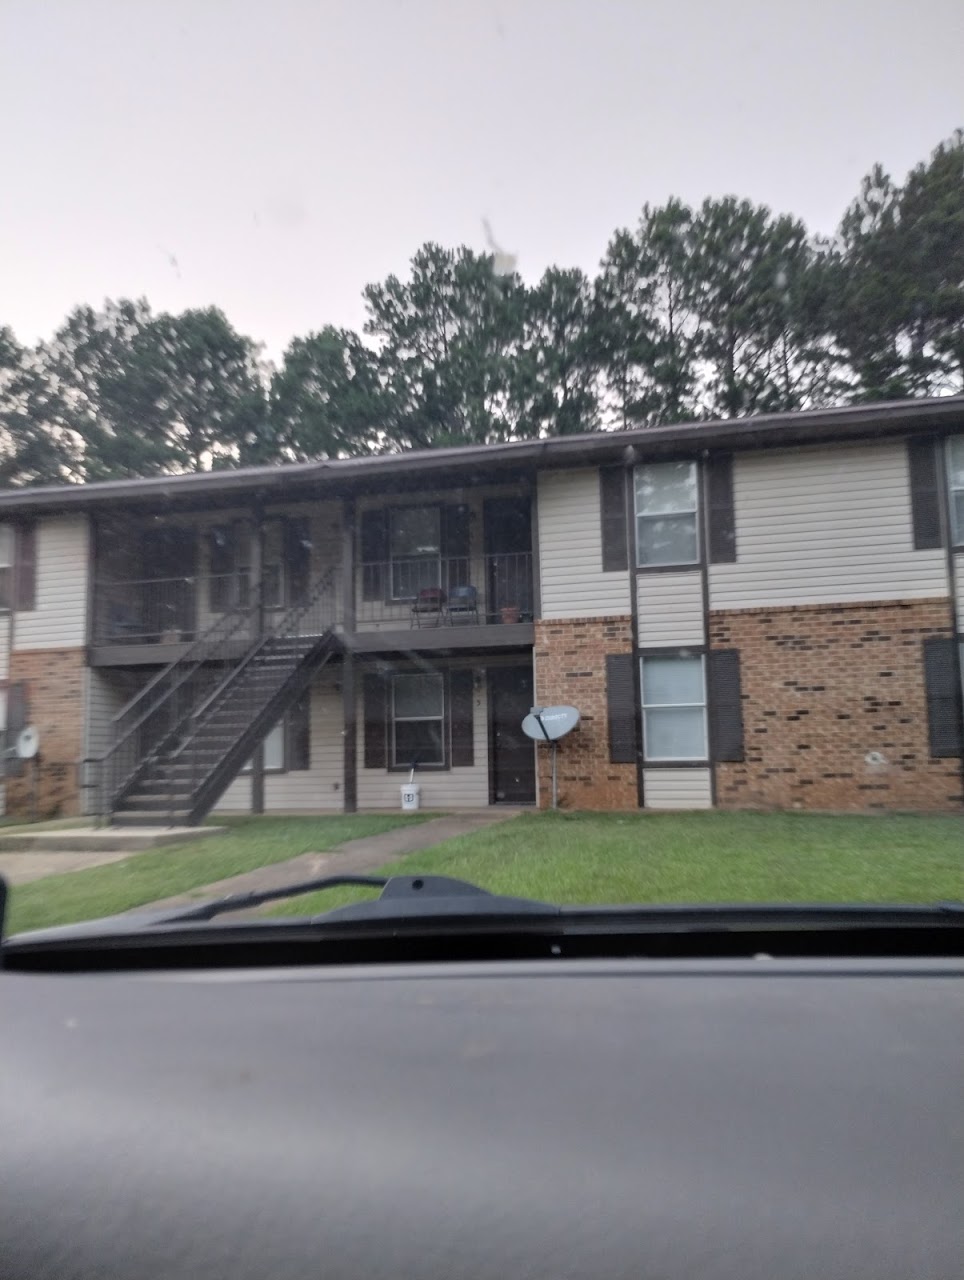 Photo of BLANCHARD PLACE II APARTMENTS. Affordable housing located at 3900 ROY ROAD BLANCHARD, LA 71009